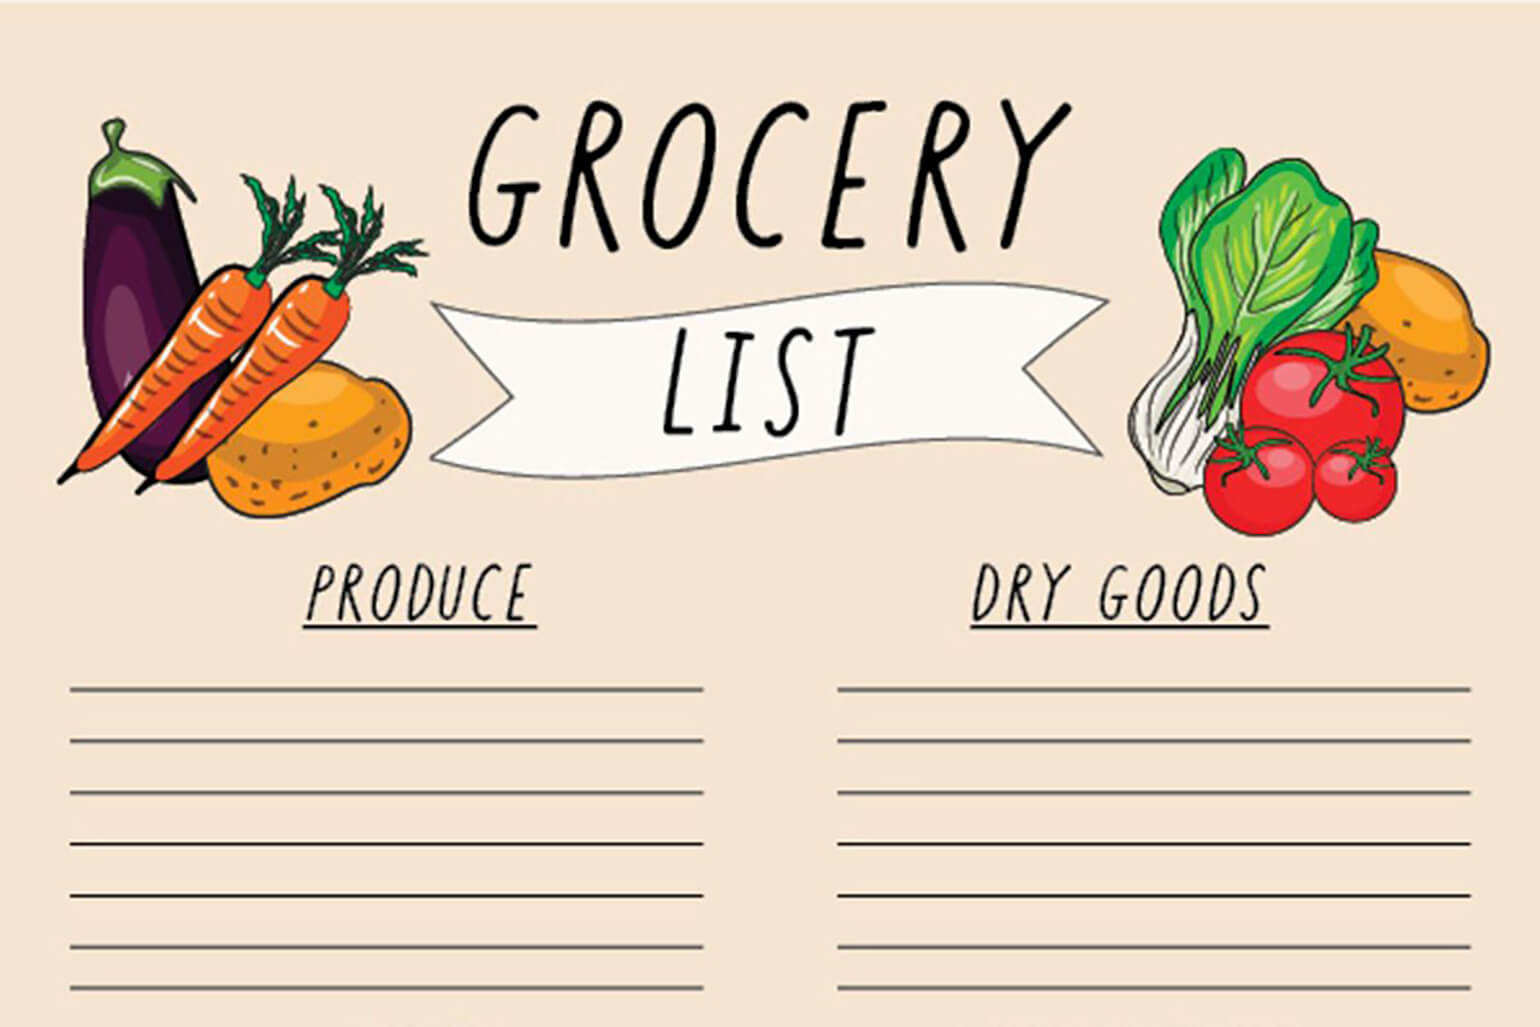 Image is a piece of stationary that has the heading 'Grocery List' with drawings of fruits and vegetables next to it. Below is a list for 'produce' and a list for 'dry goods' to be entered.